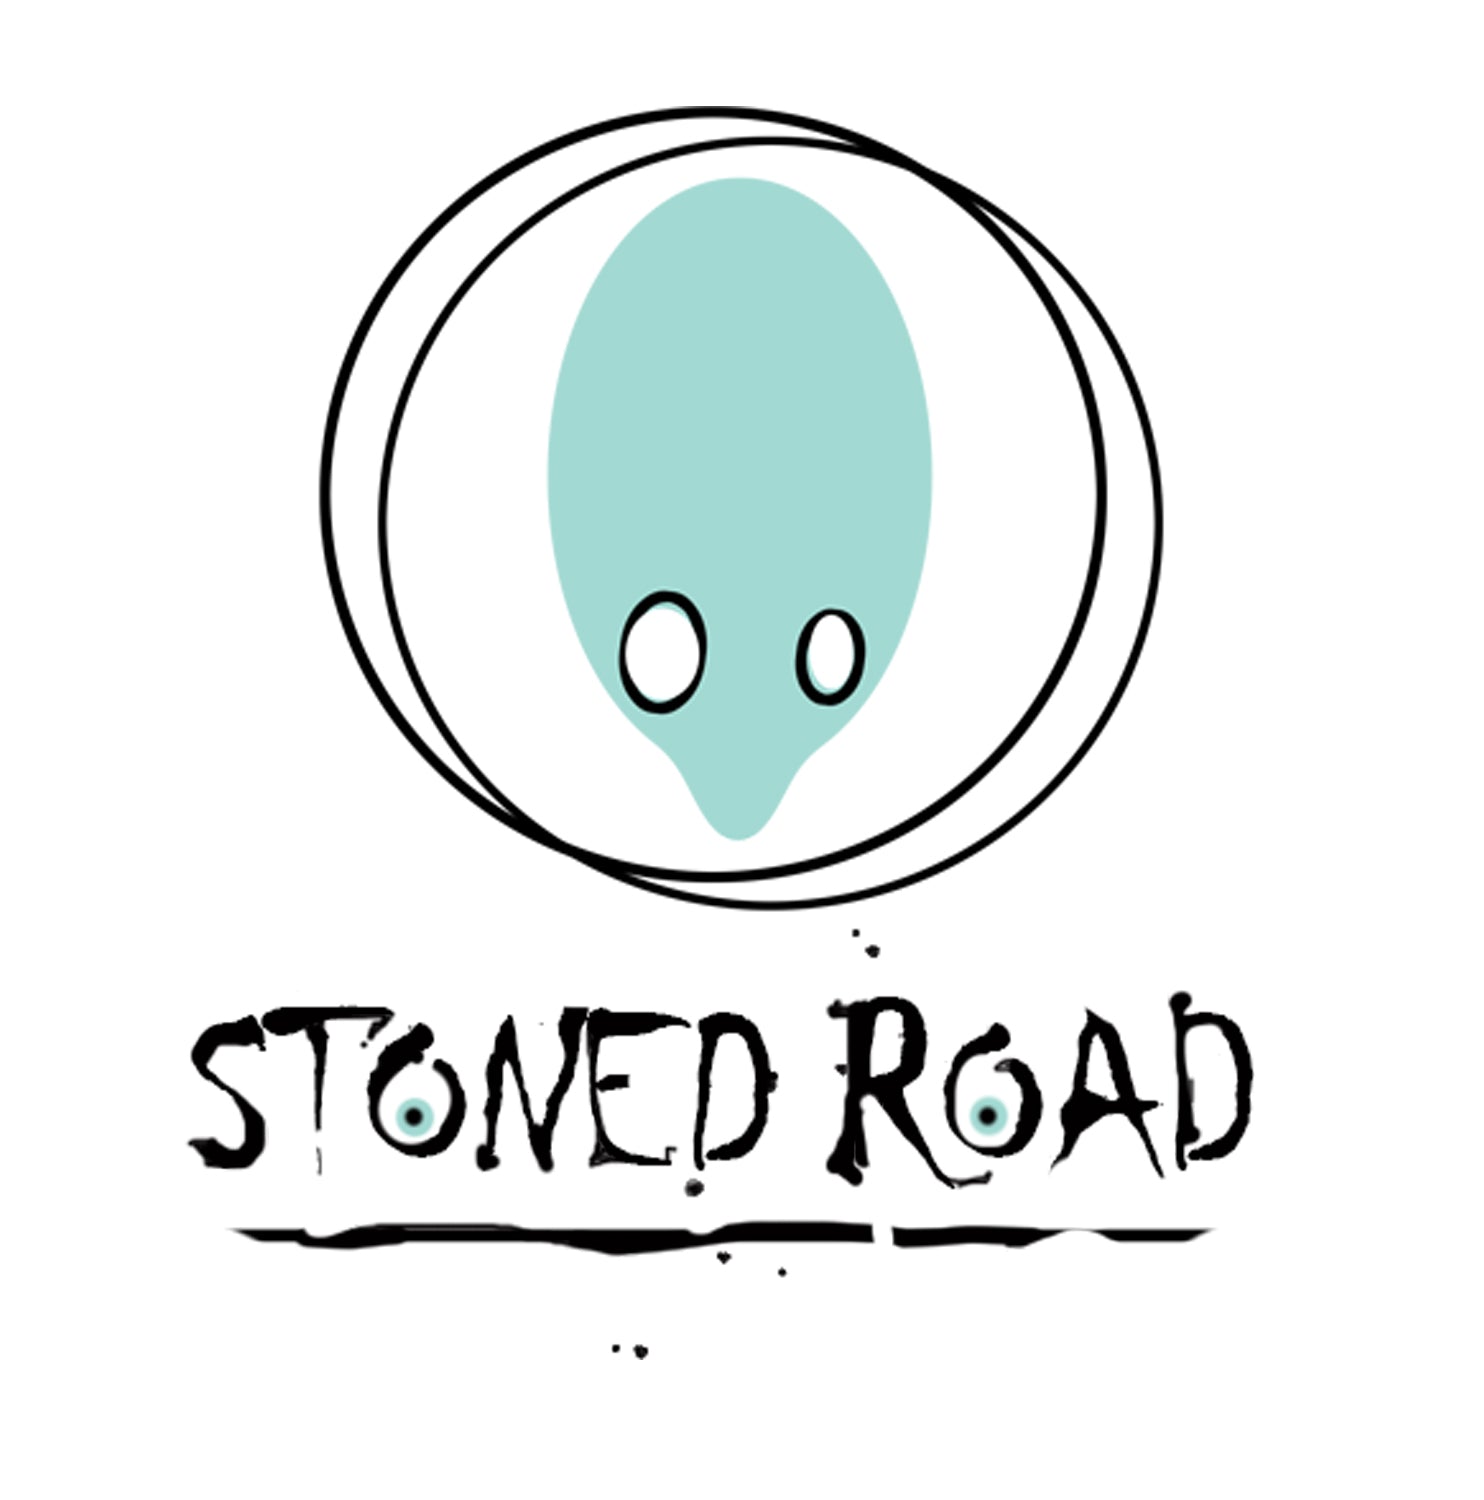 Stoned Road